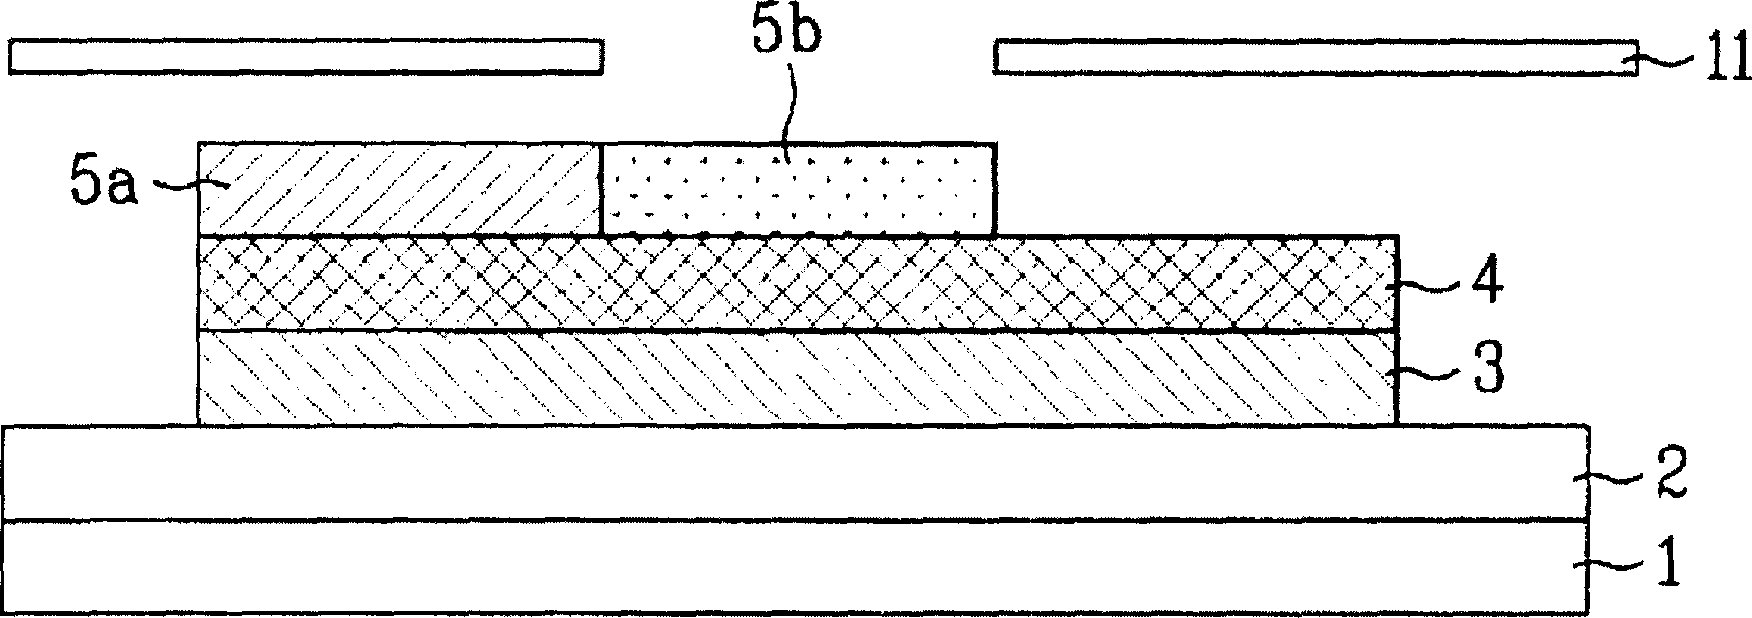 Organic electroluminescent device and method for fabricating the same